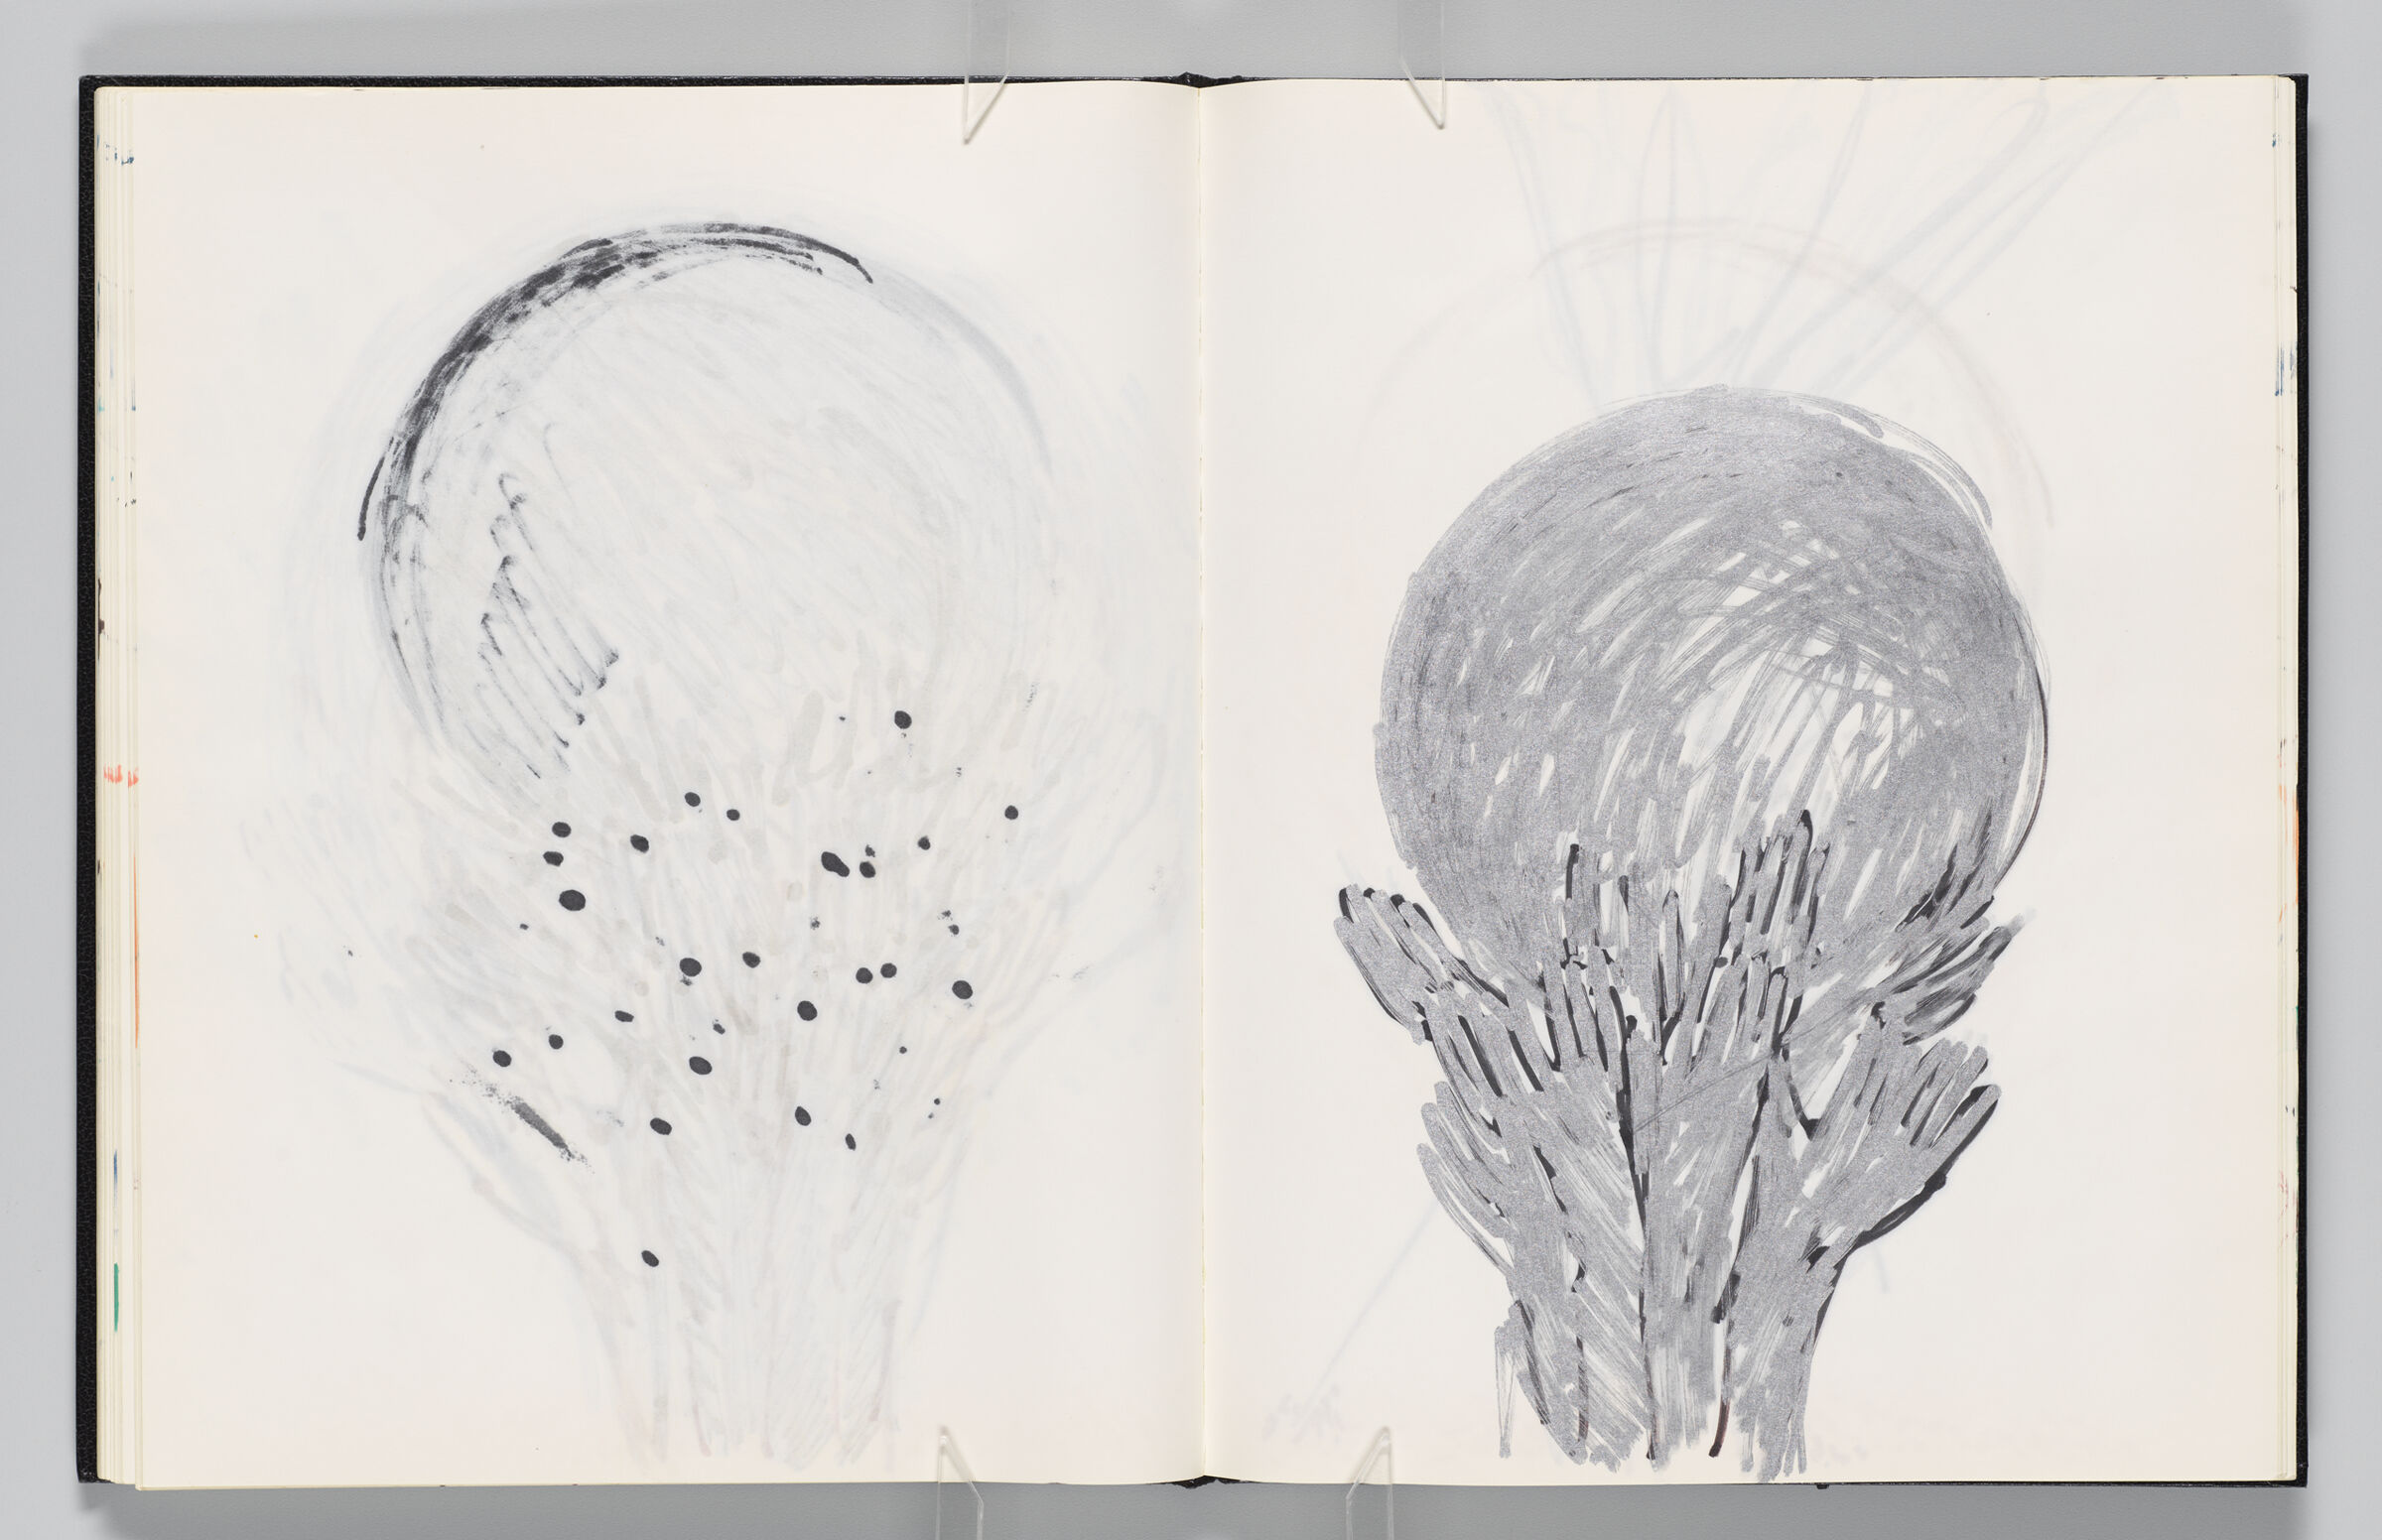 Untitled (Bleed-Through Of Previous Page, Left Page); Untitled (Hands Holding Globe, Right Page)